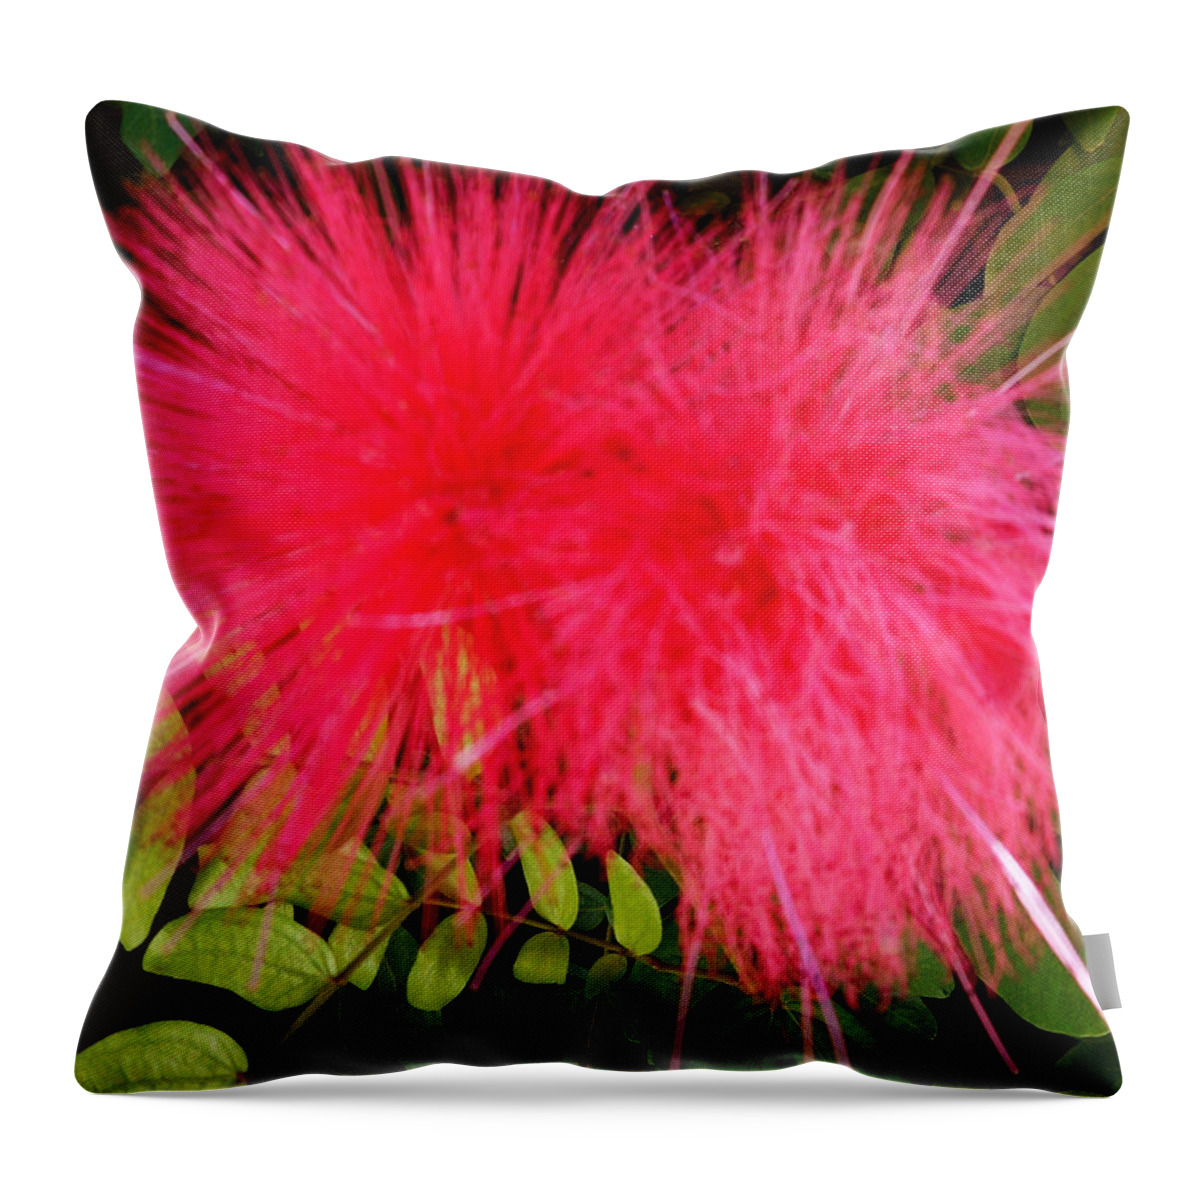 Flowers Throw Pillow featuring the photograph Pom Poms 1 by Ron Kandt